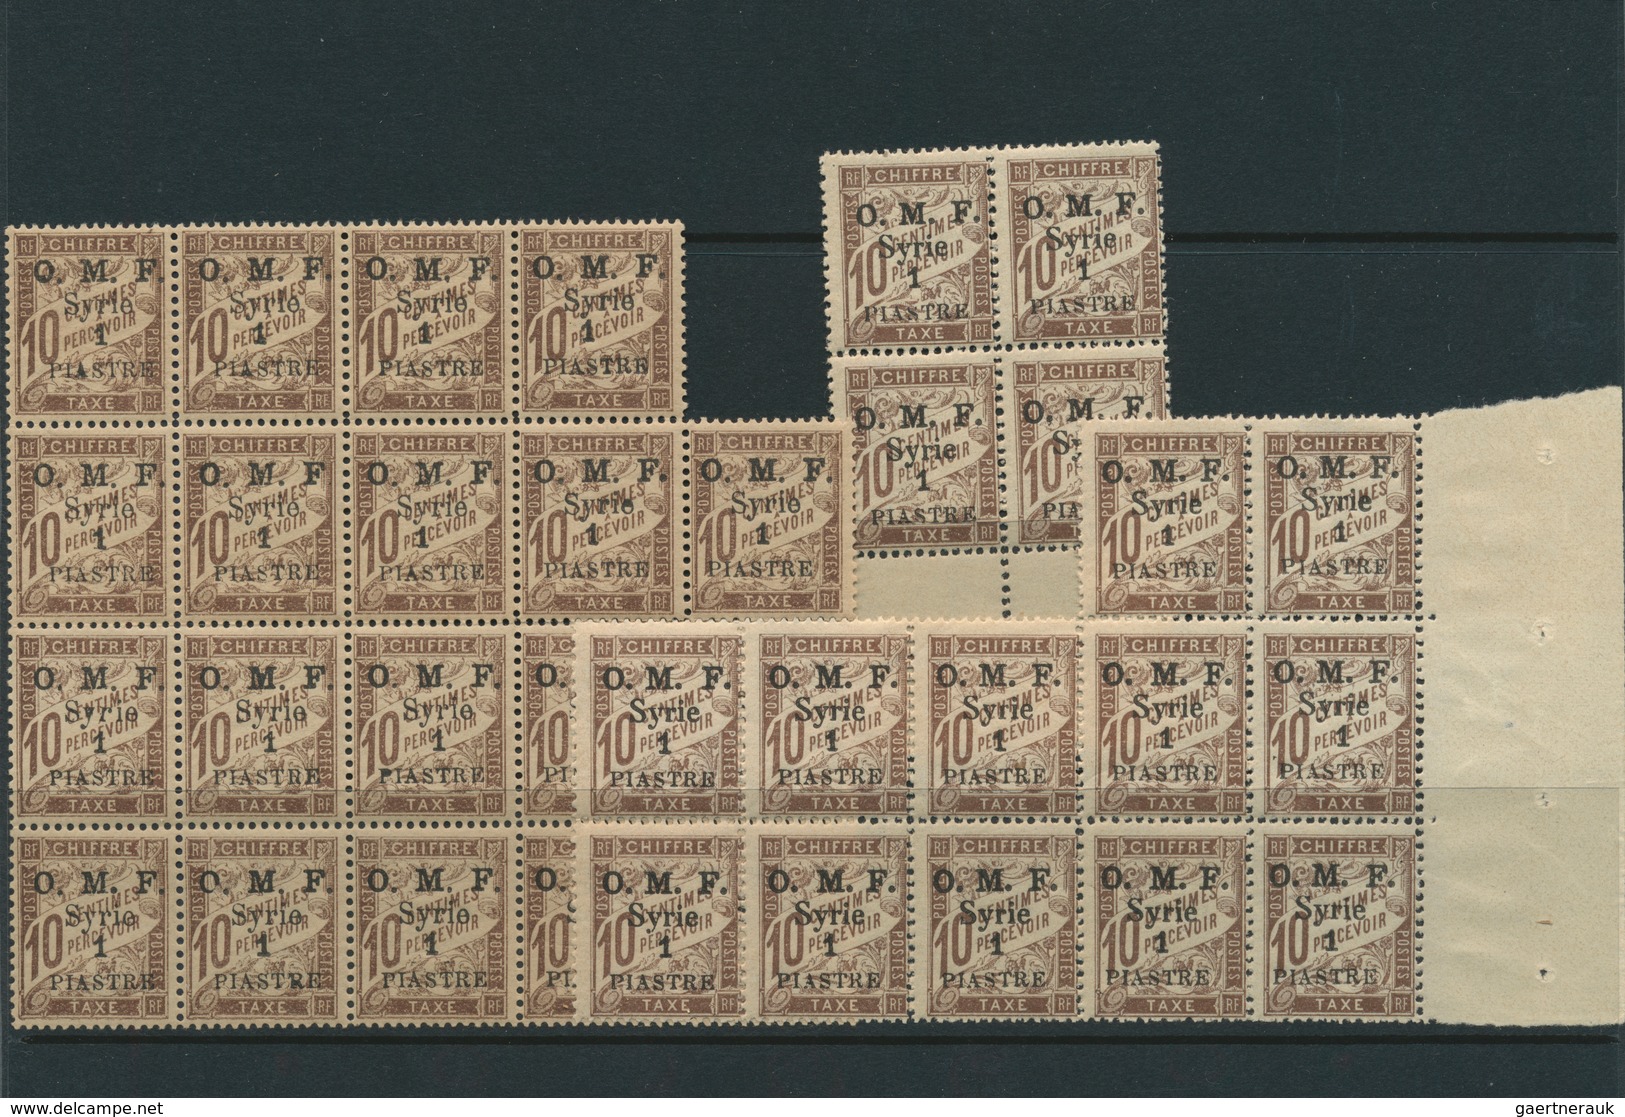 24224 Syrien - Portomarken: 1920/1924, u/m assortment of different issues, mainly (larger) units. Maury 7.